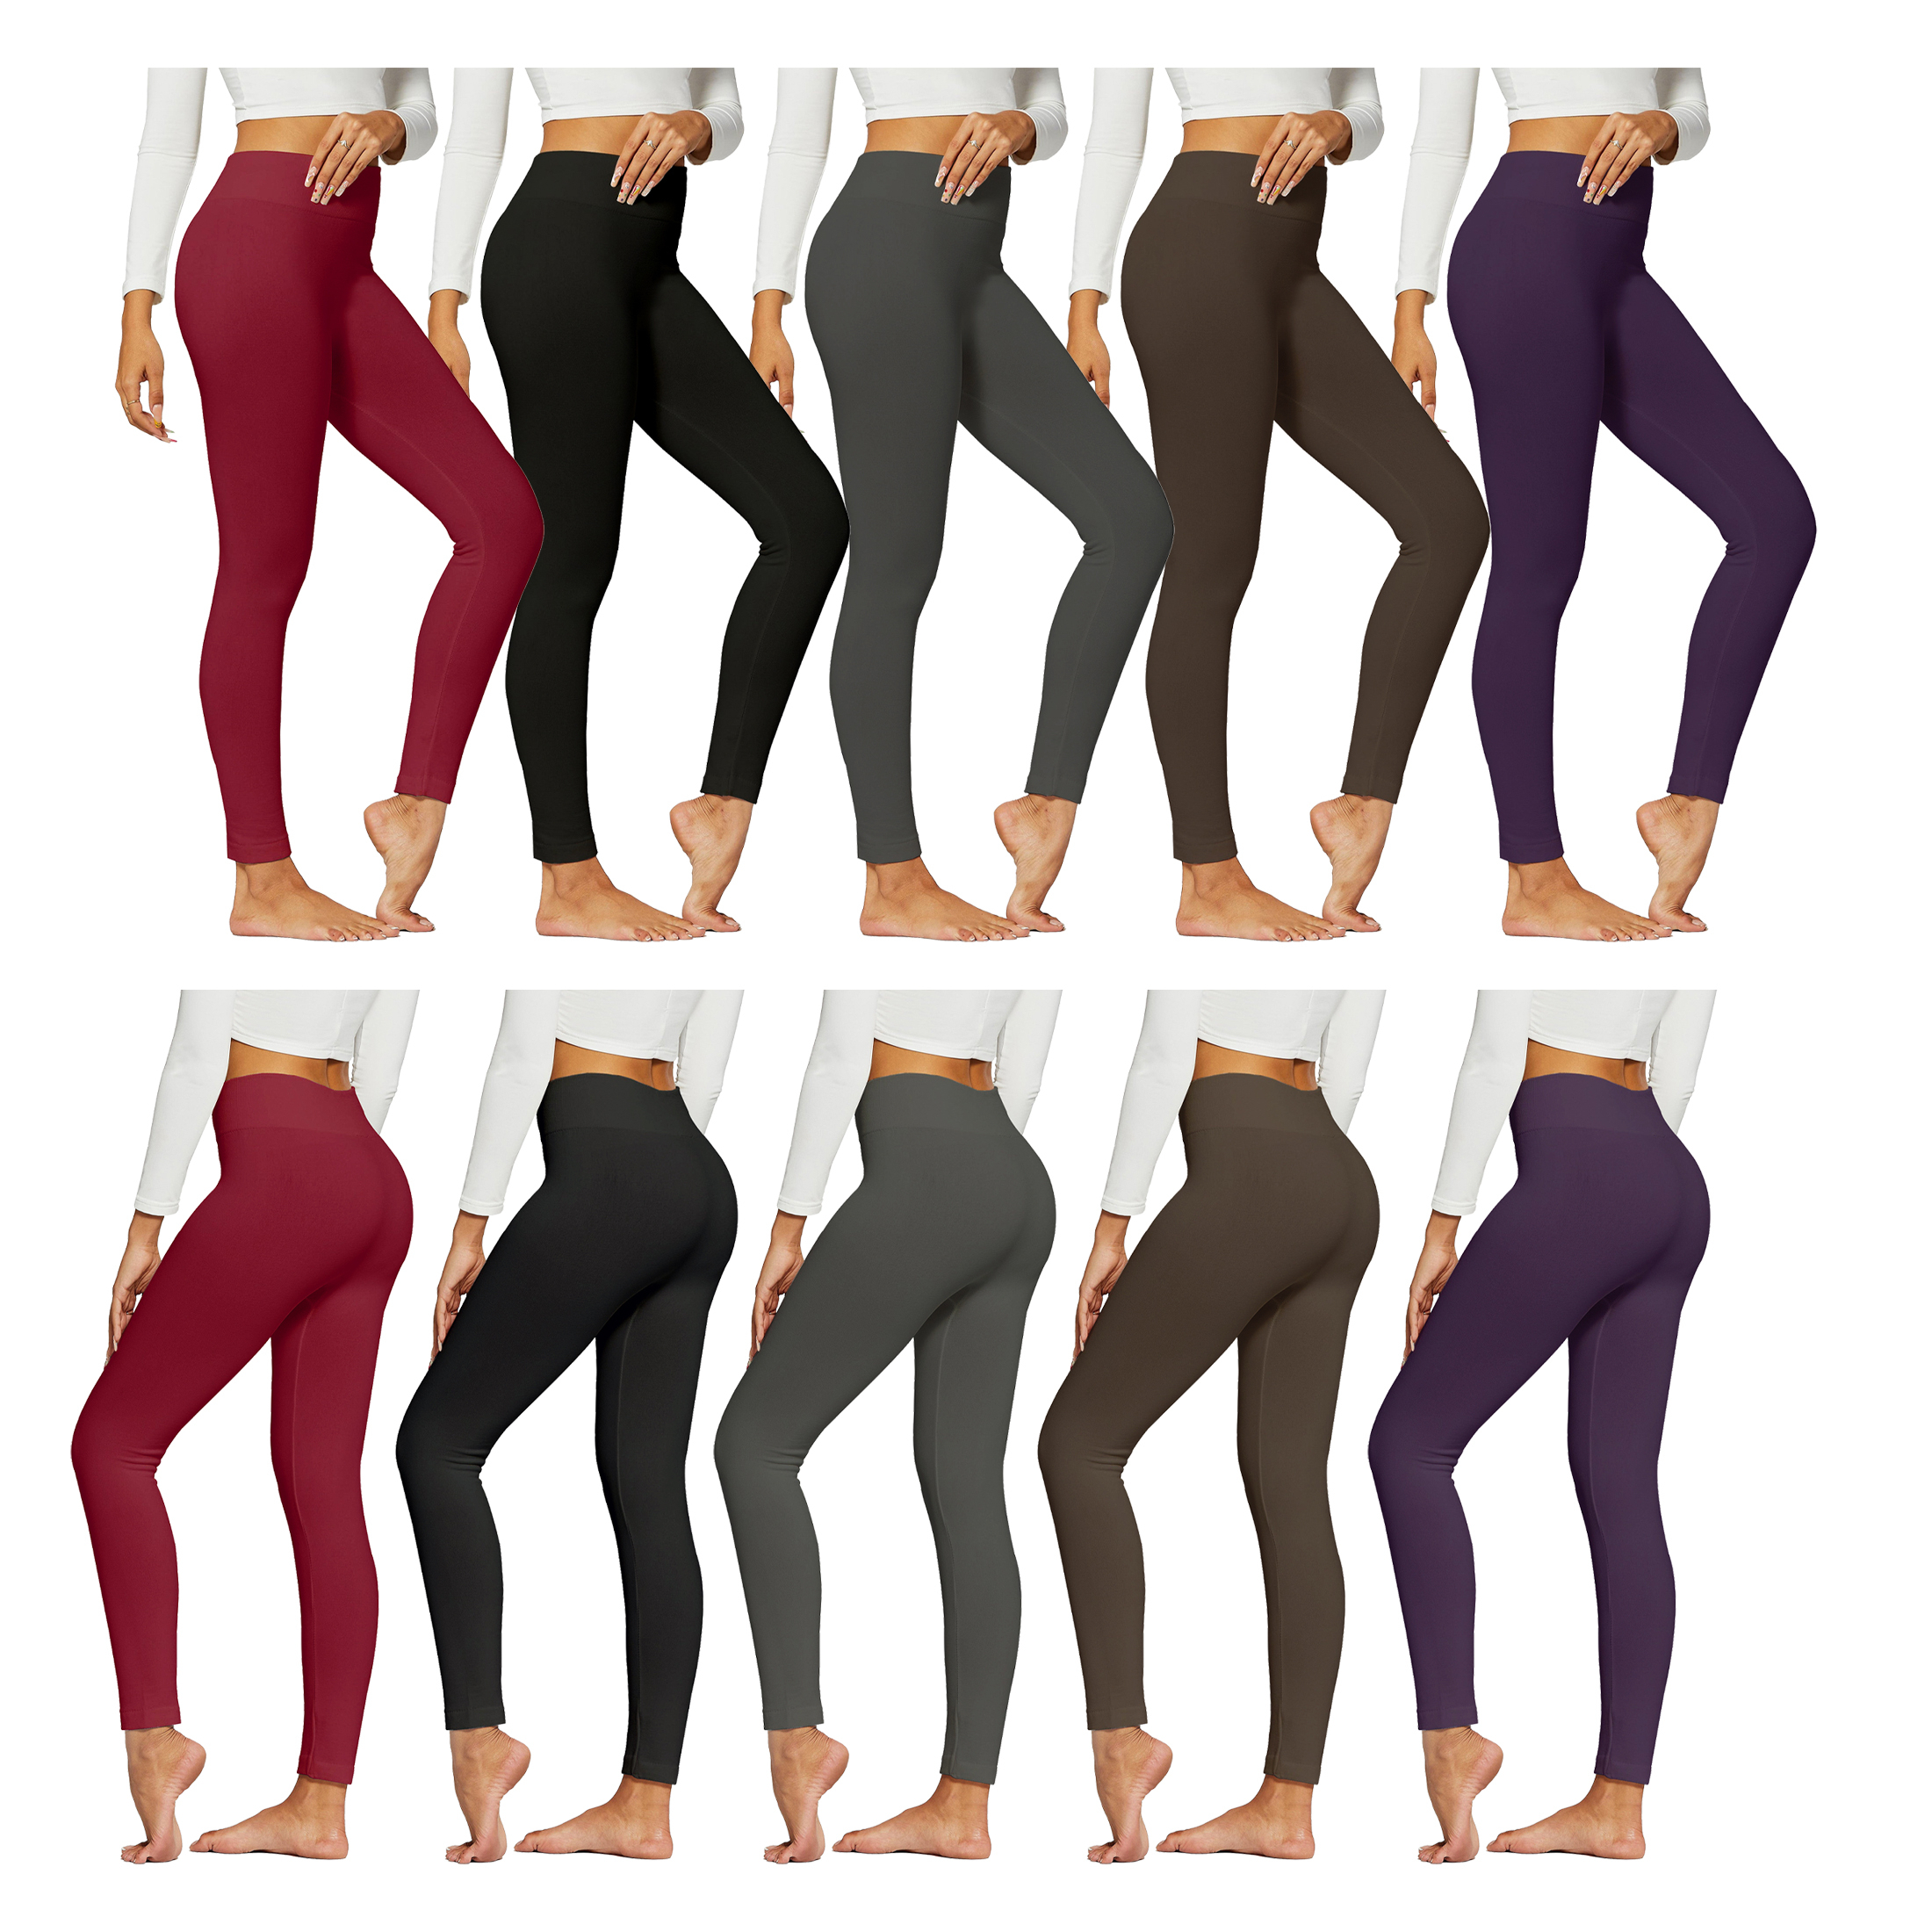 3-Pack:Women's Premium Quality High-Waist Fleece-Lined Leggings (Plus Size Available) - Black, Grey & Brown, Large/X-Large